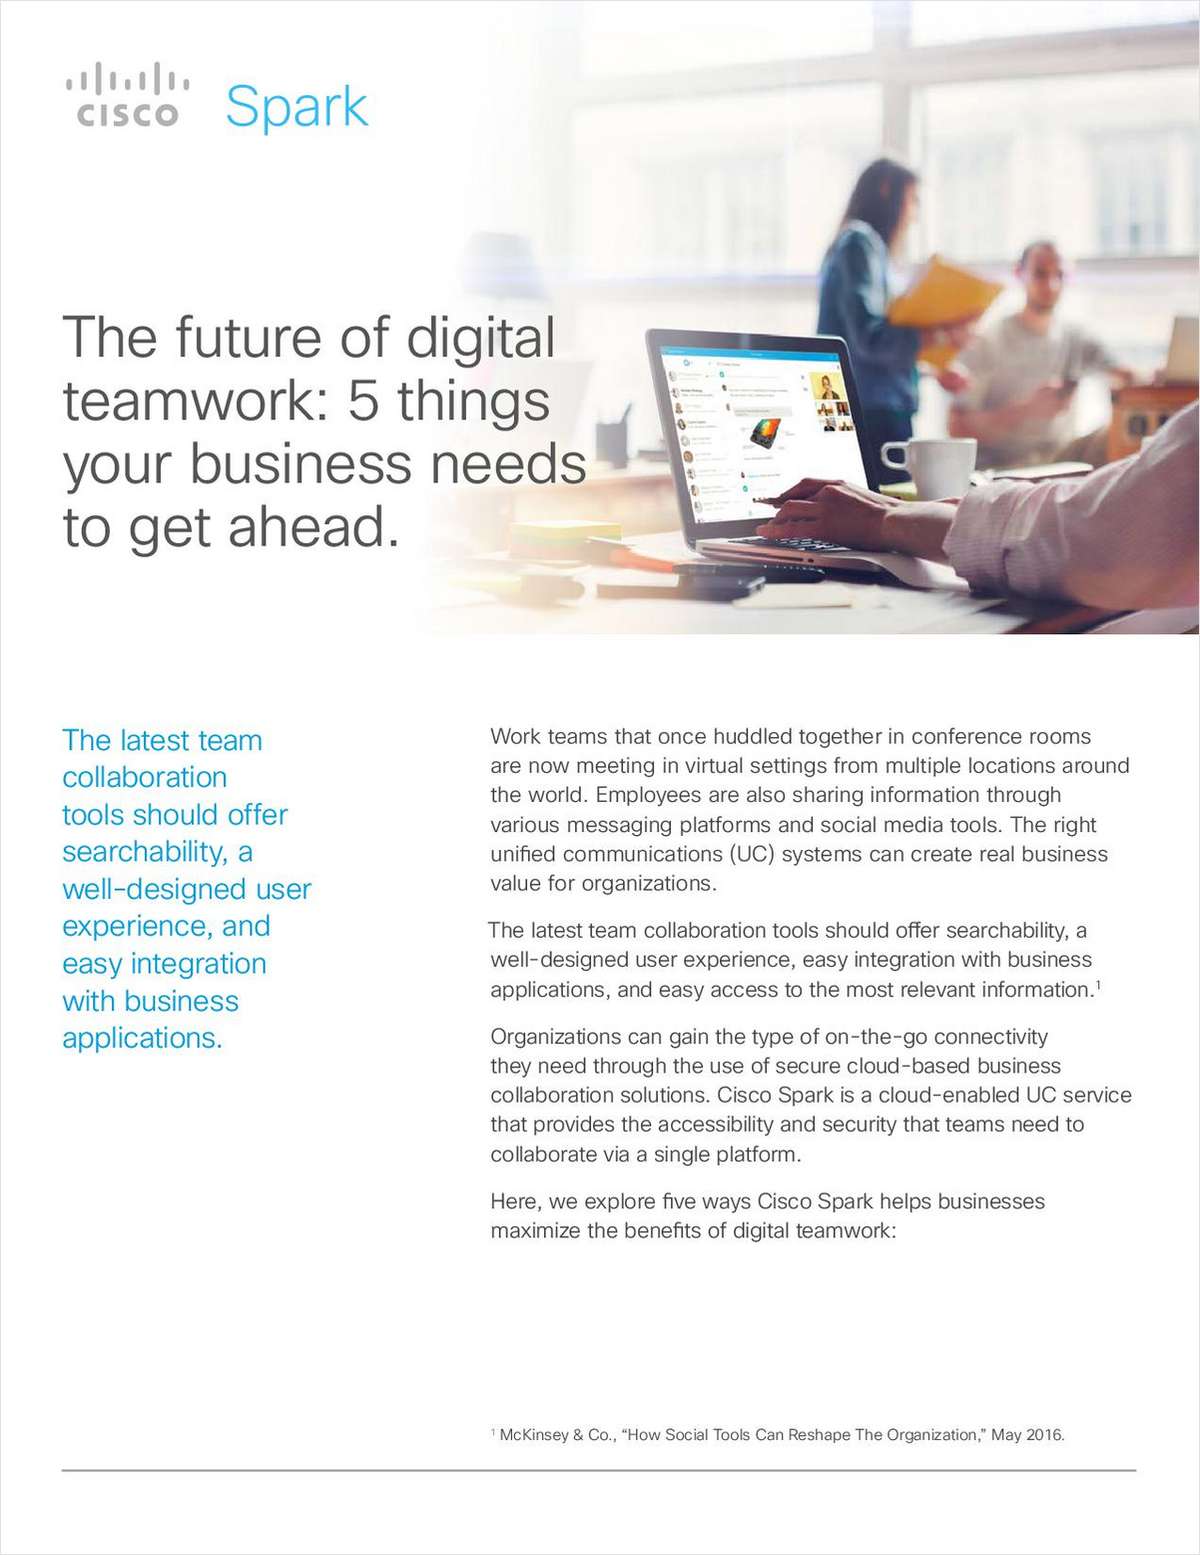 The Future of Digital Teamwork: 5 Things Your Business Needs To Get Ahead